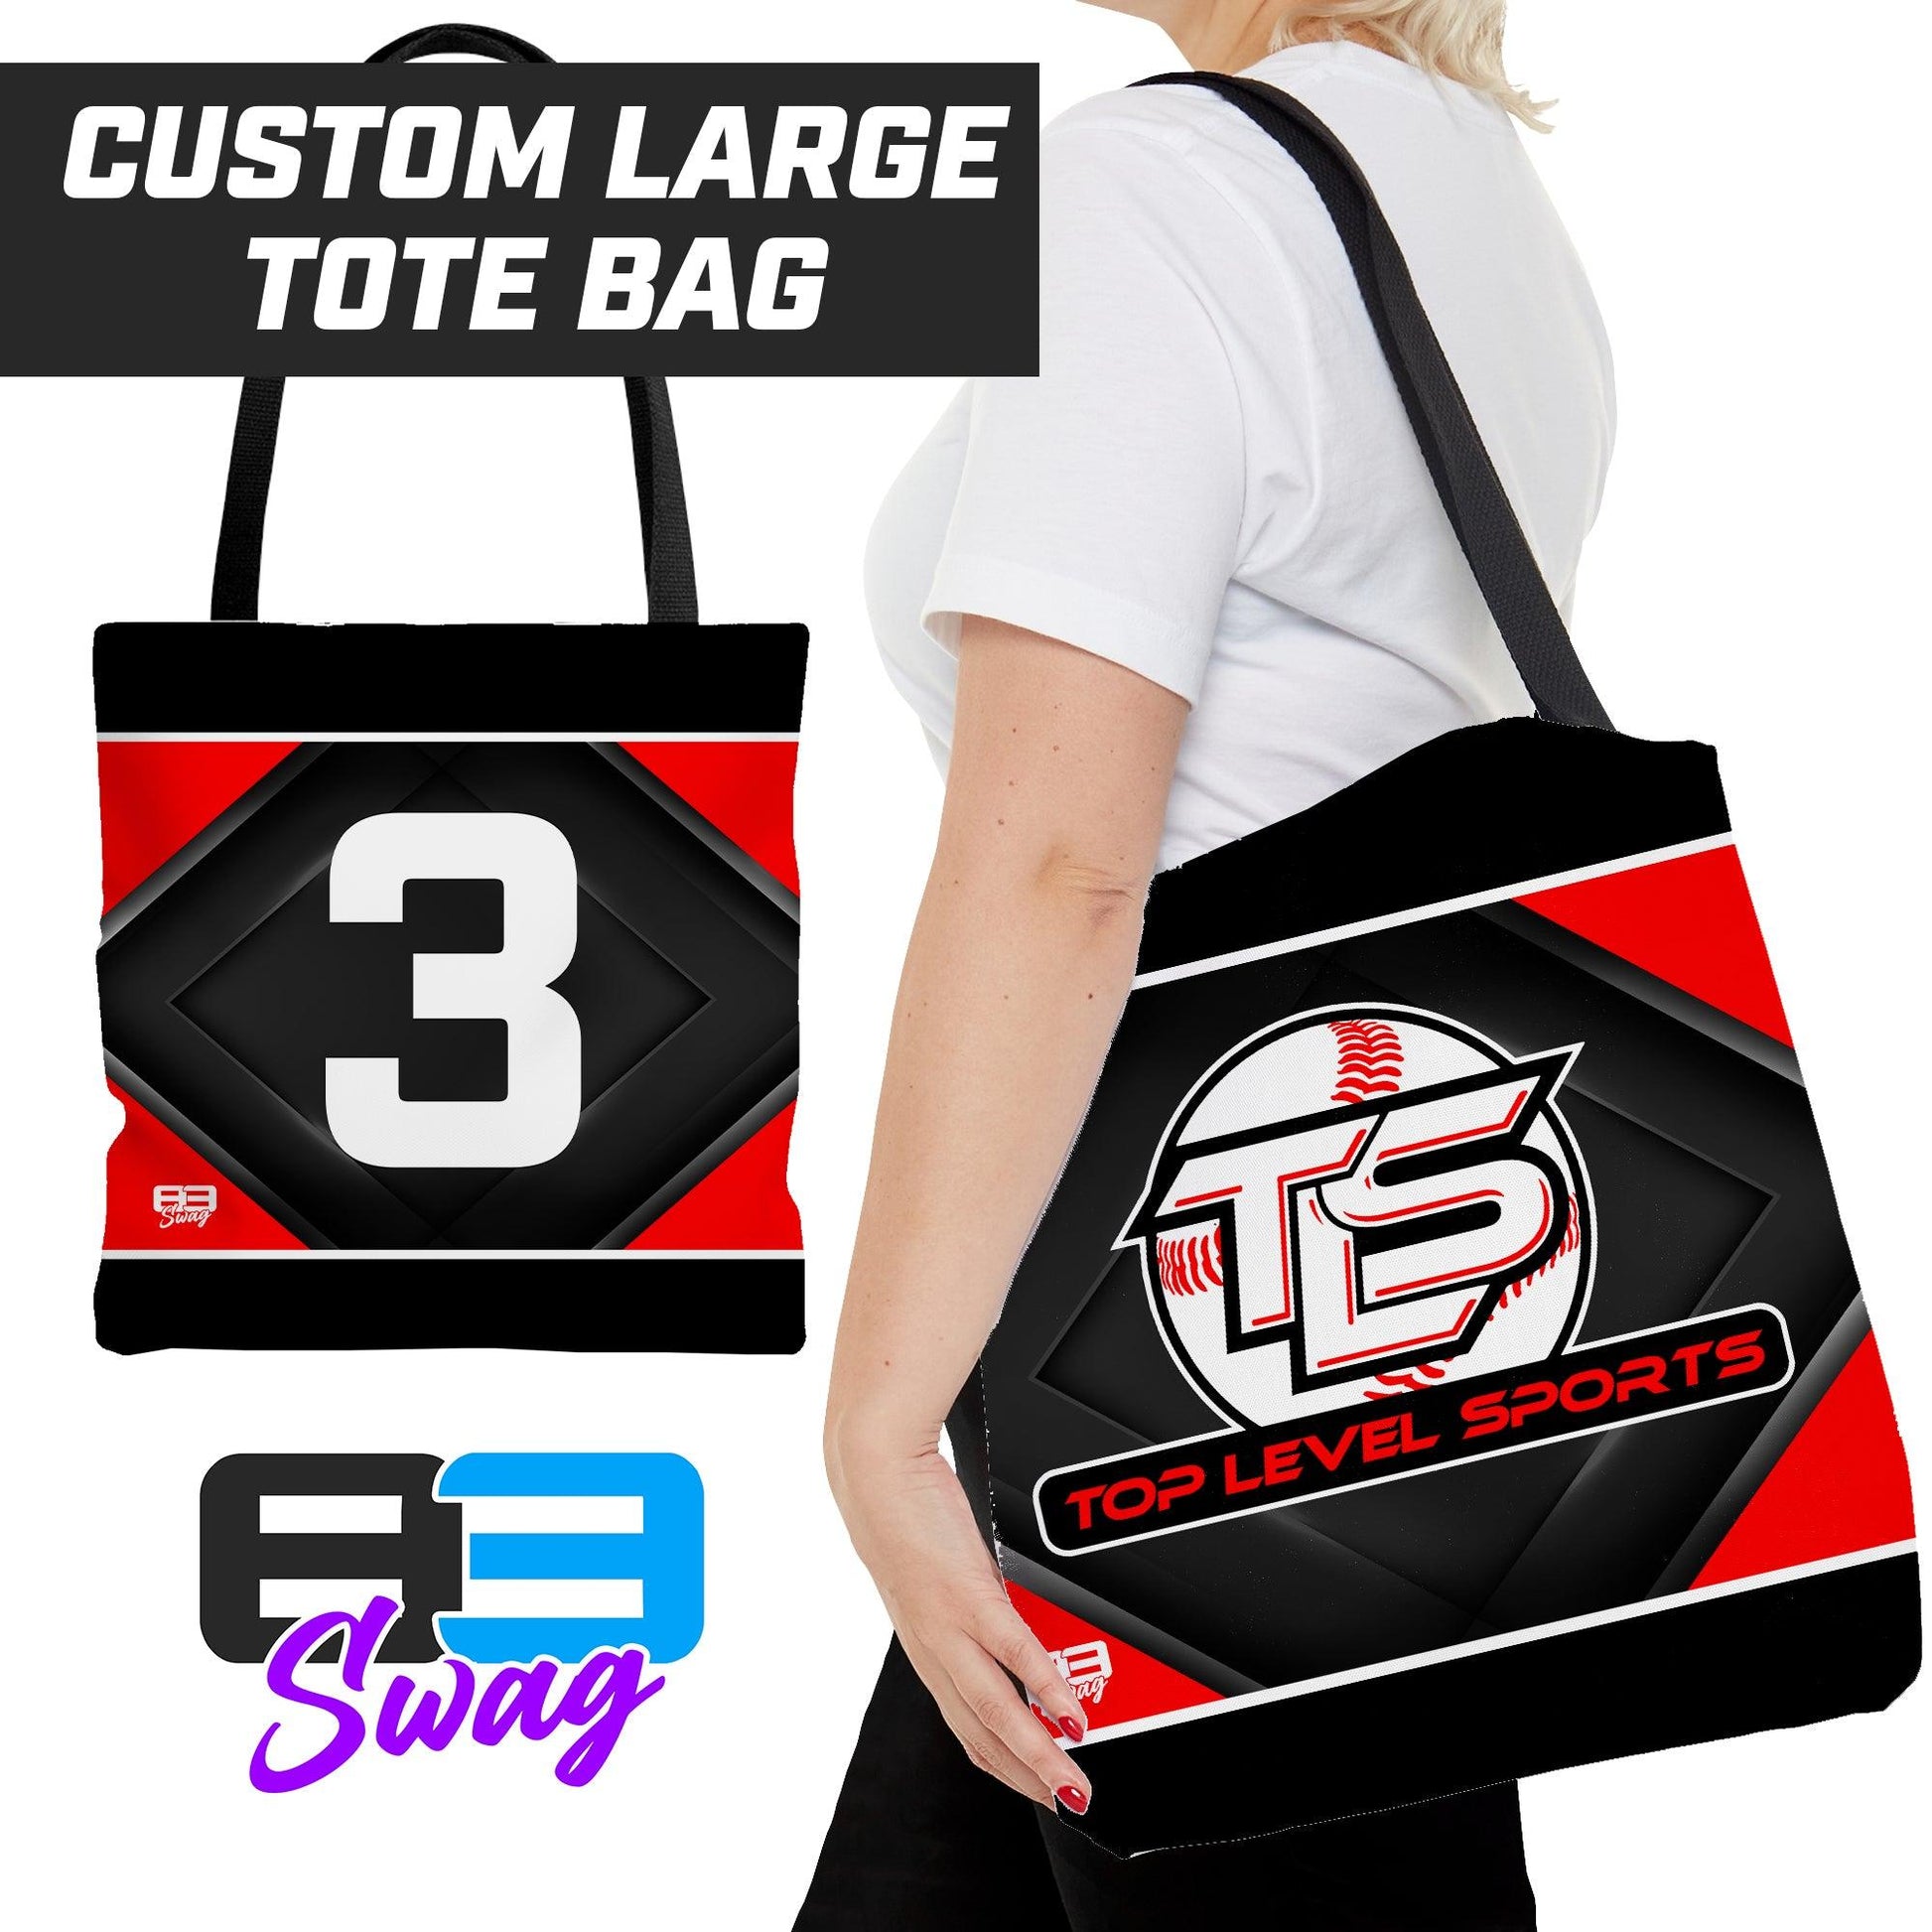 TOP LEVEL SPORTS - Tote Bag - 83Swag